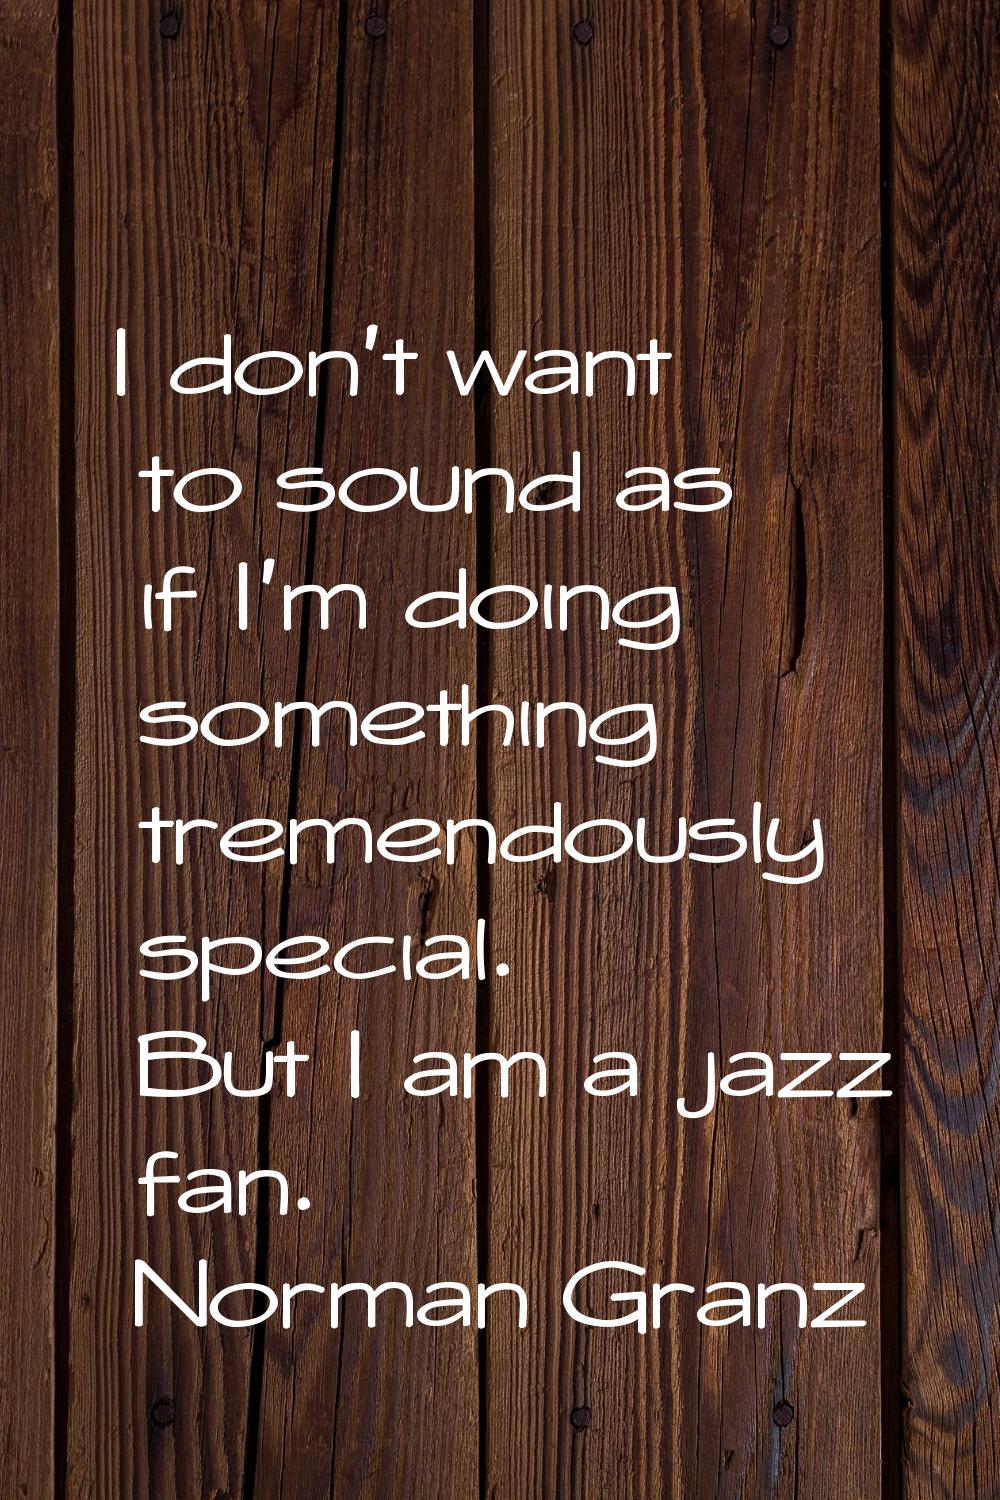 I don't want to sound as if I'm doing something tremendously special. But I am a jazz fan.